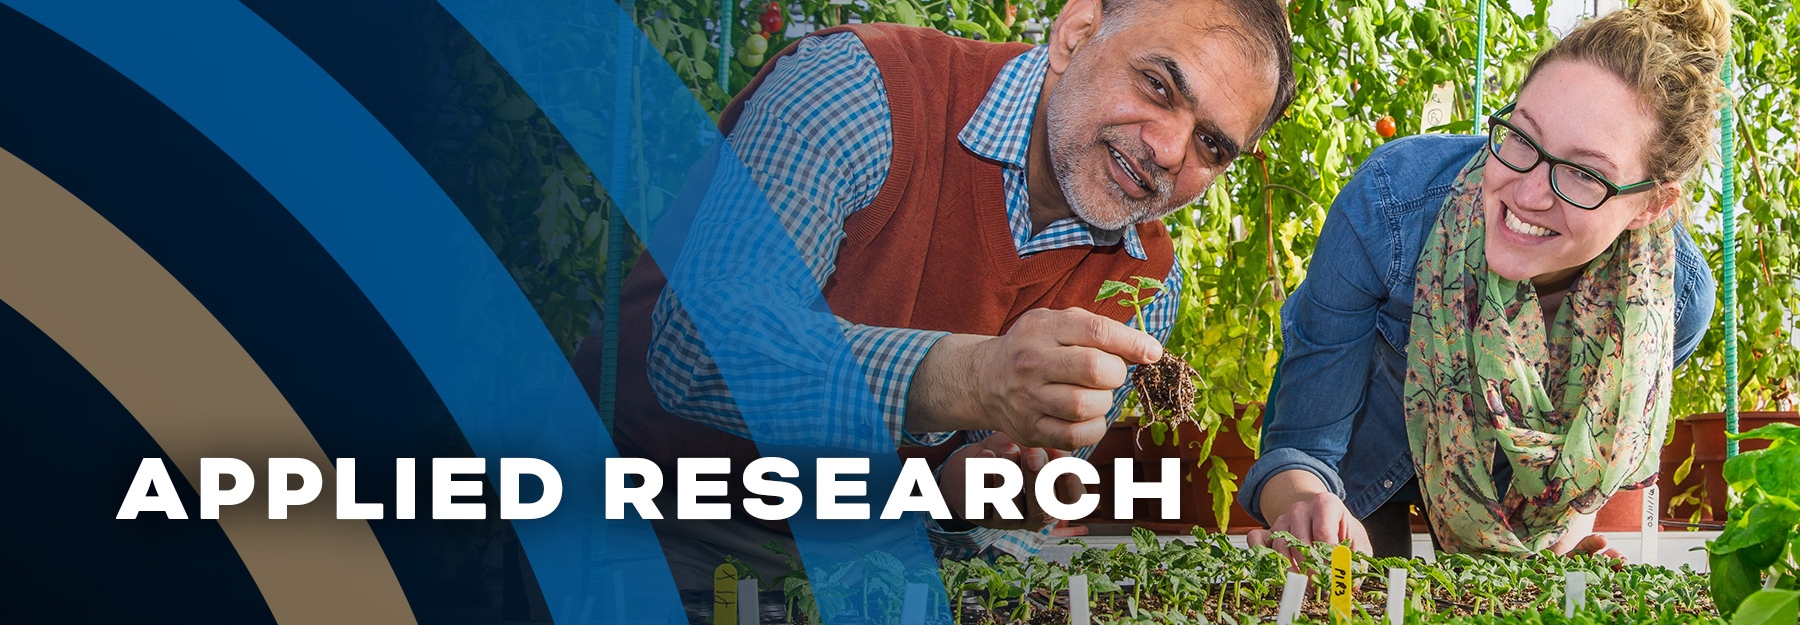 Dr. Sajjad Rao standing over a table full of small potted plants with a person standing beside him, and tall tomato plants in the background. He is holding one of the plants in his hand. Both people are smiling and looking at the camera.